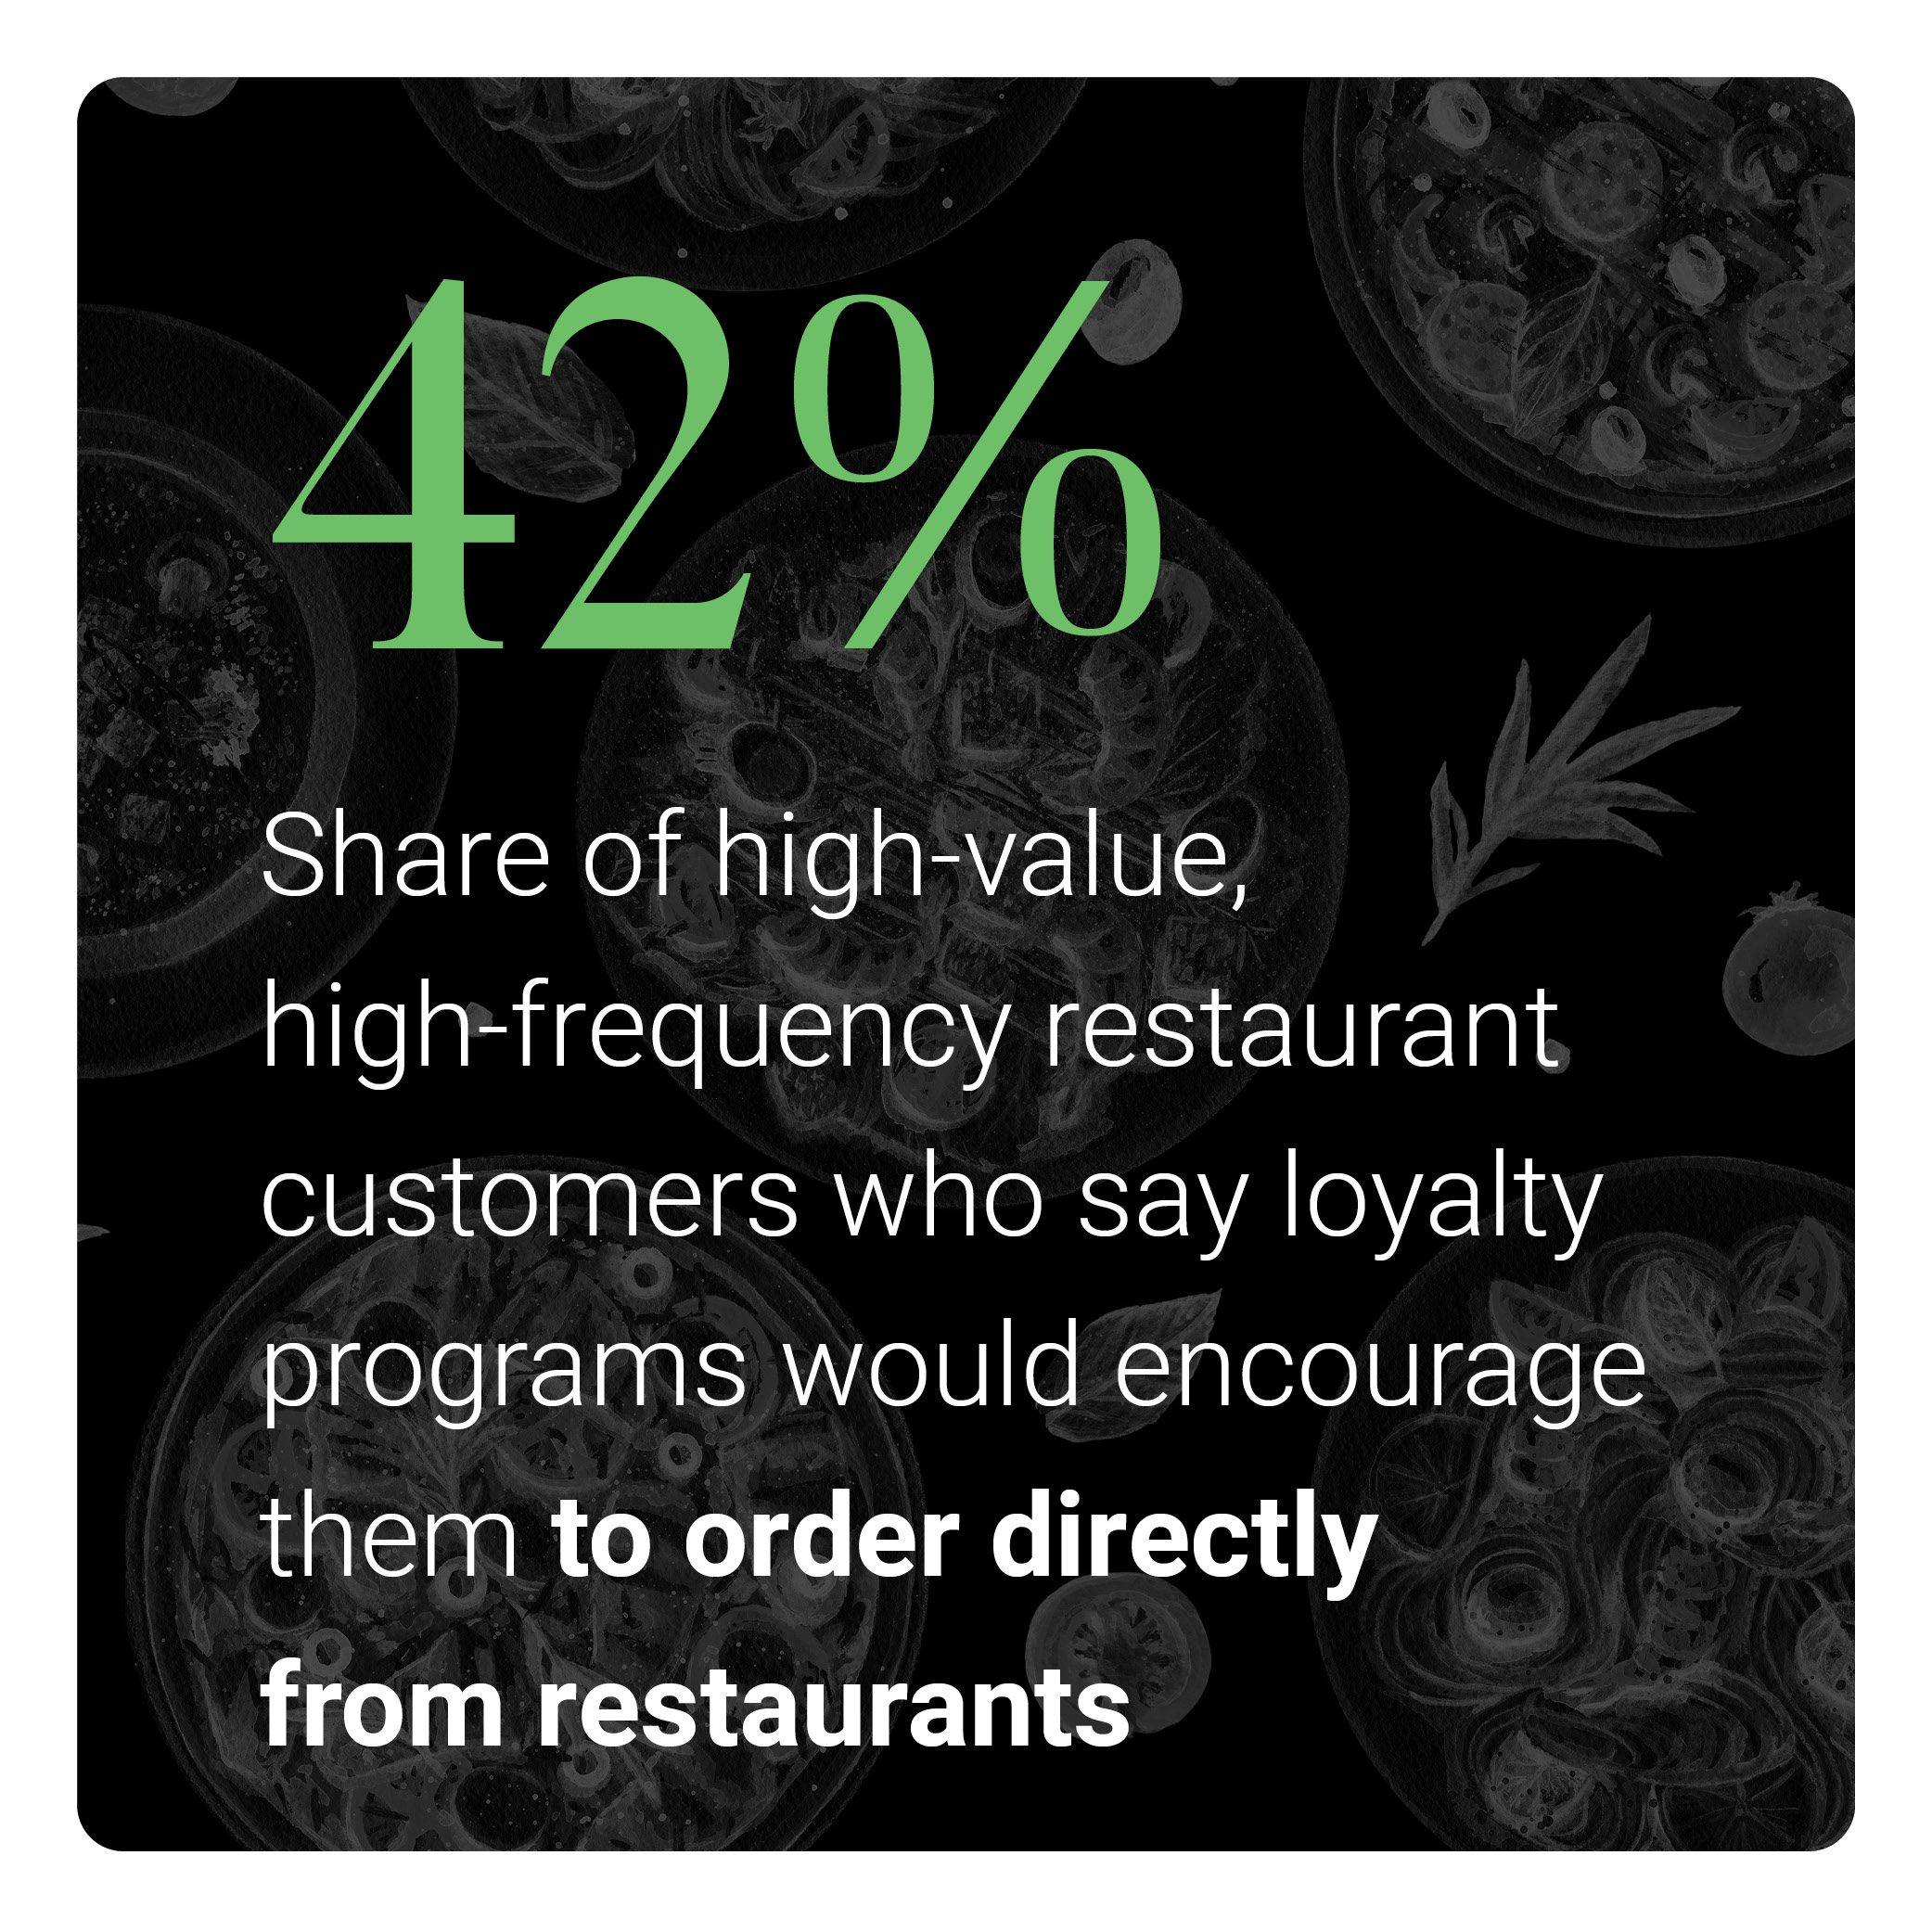 Nearly half of high-value, high-frequency customers would order directly from restaurants if loyalty programs were available